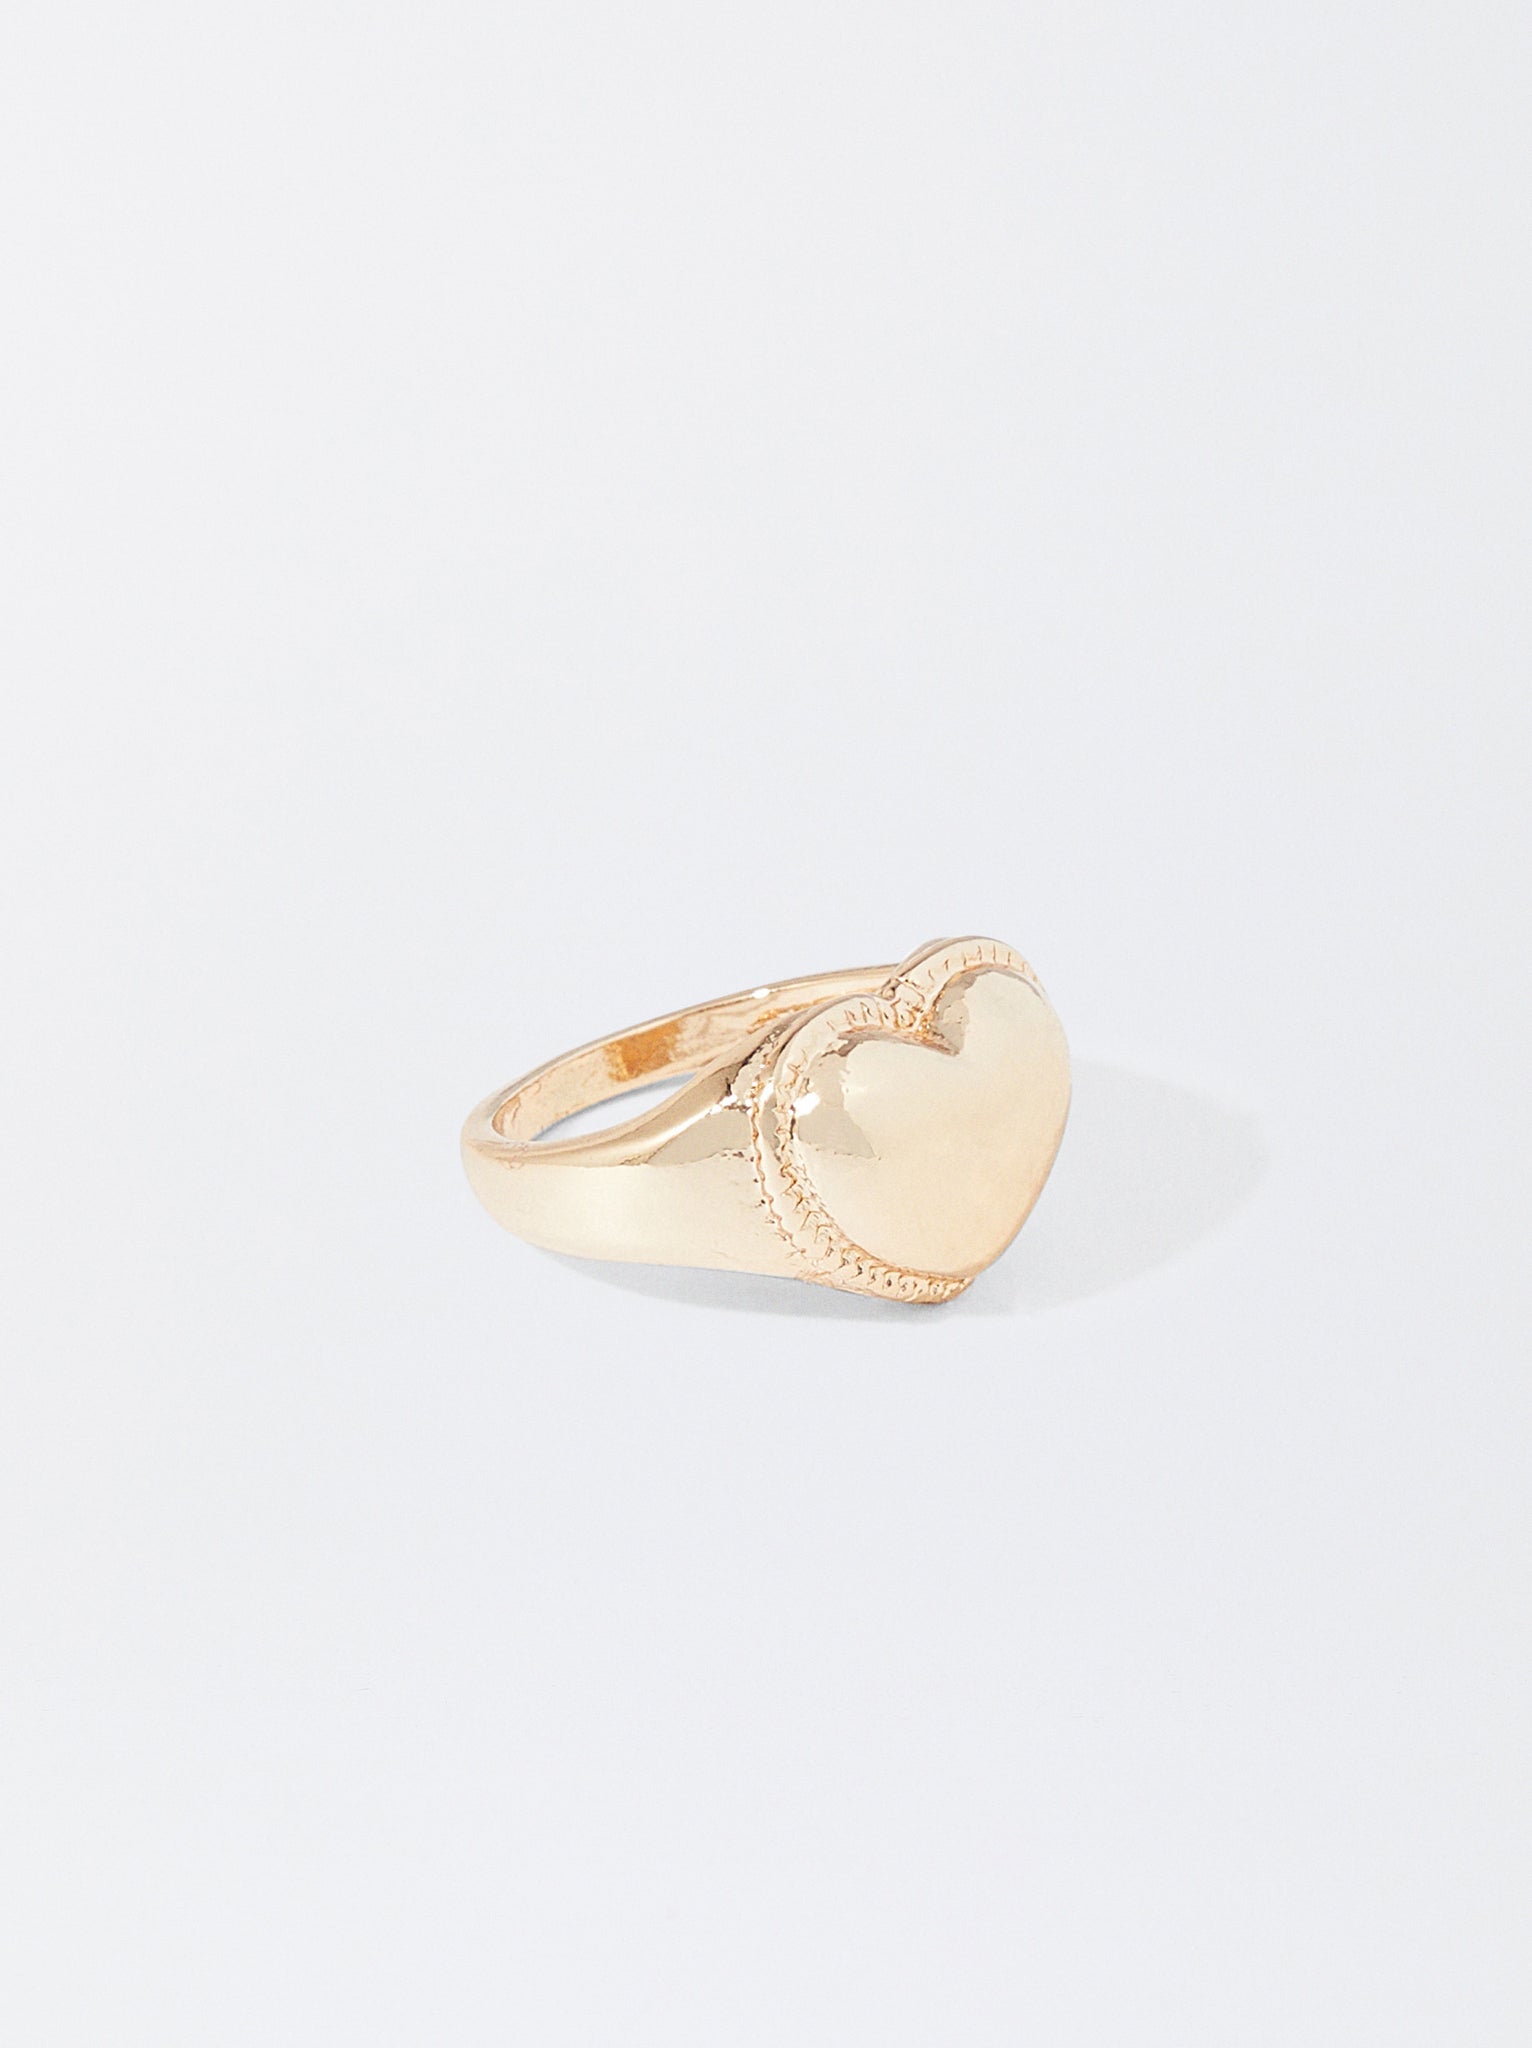 Gold-Toned Ring With Heart